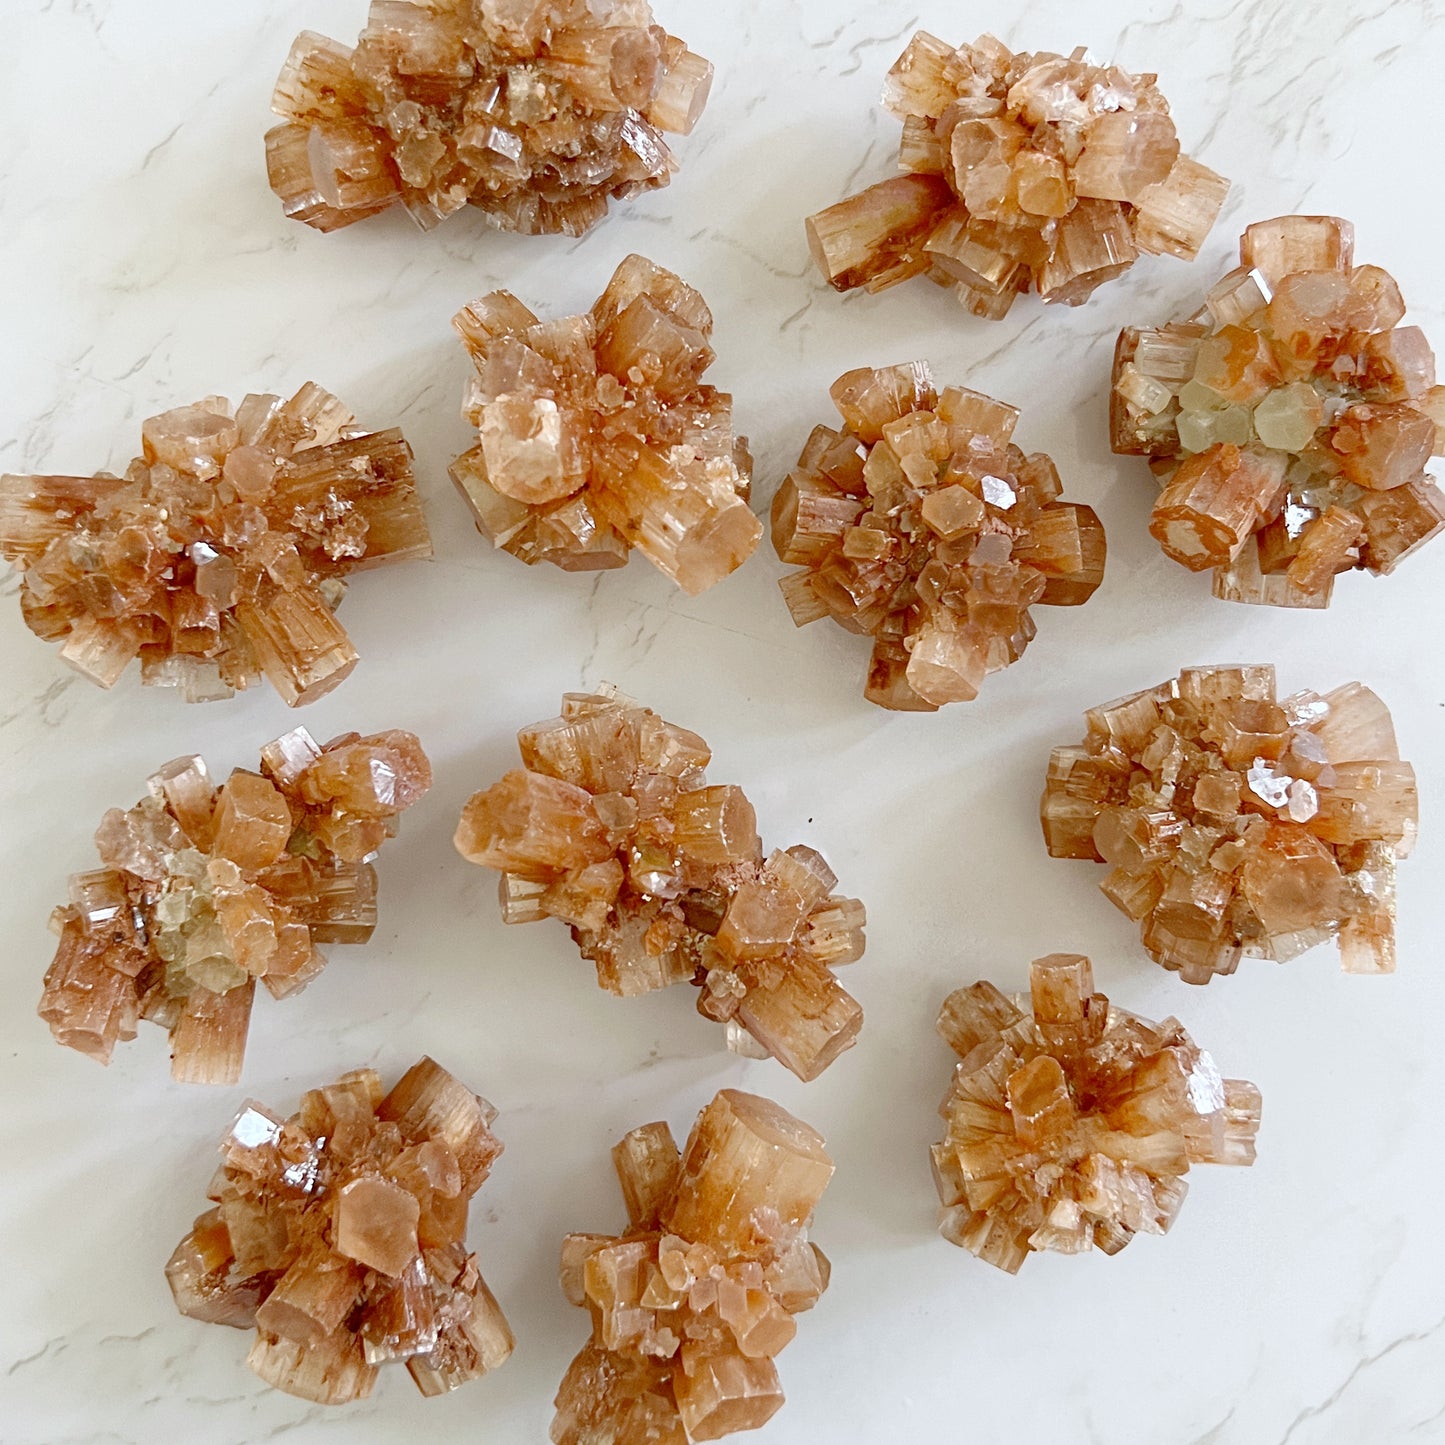 A collection of aragonite crystal clusters